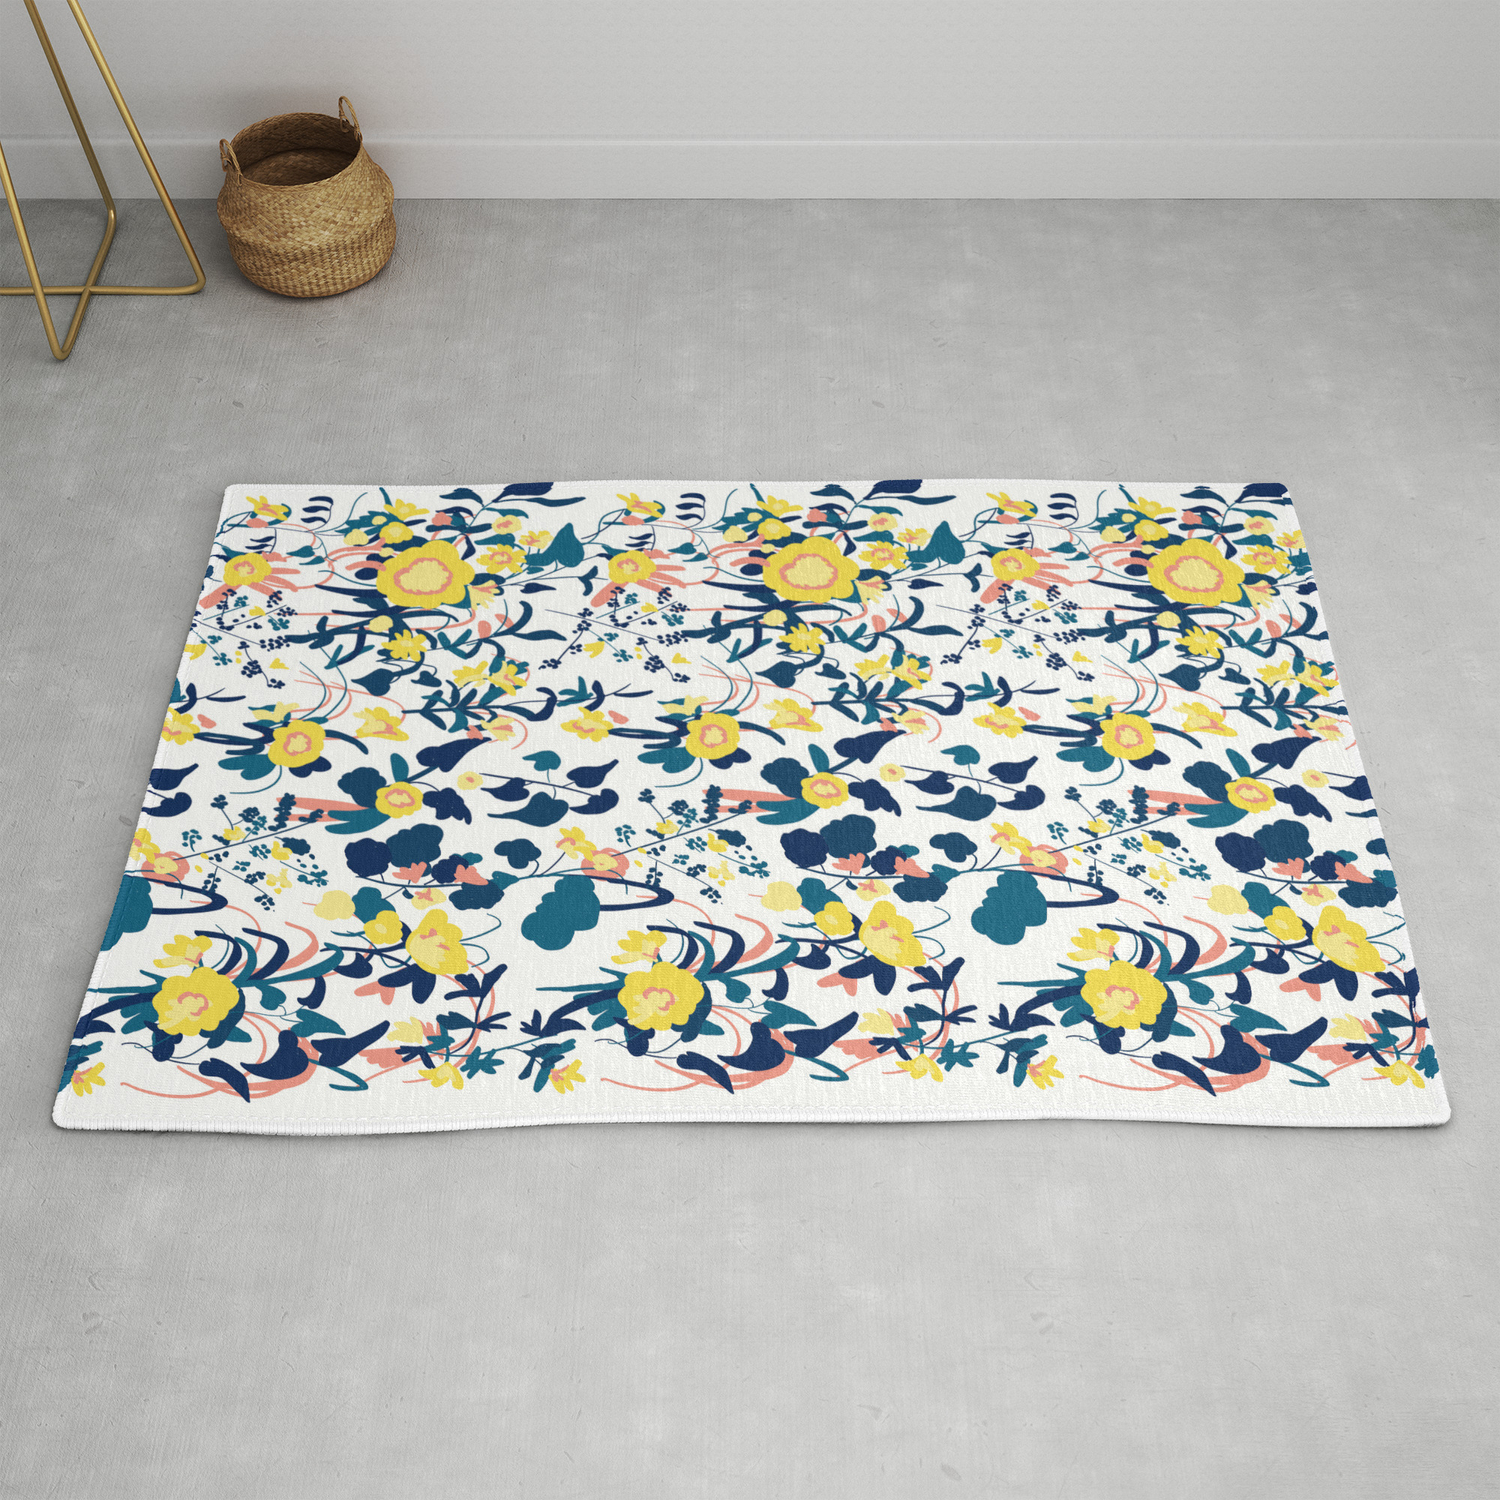 Ercup Yellow Salmon Pink And Navy, Yellow Patterned Rug